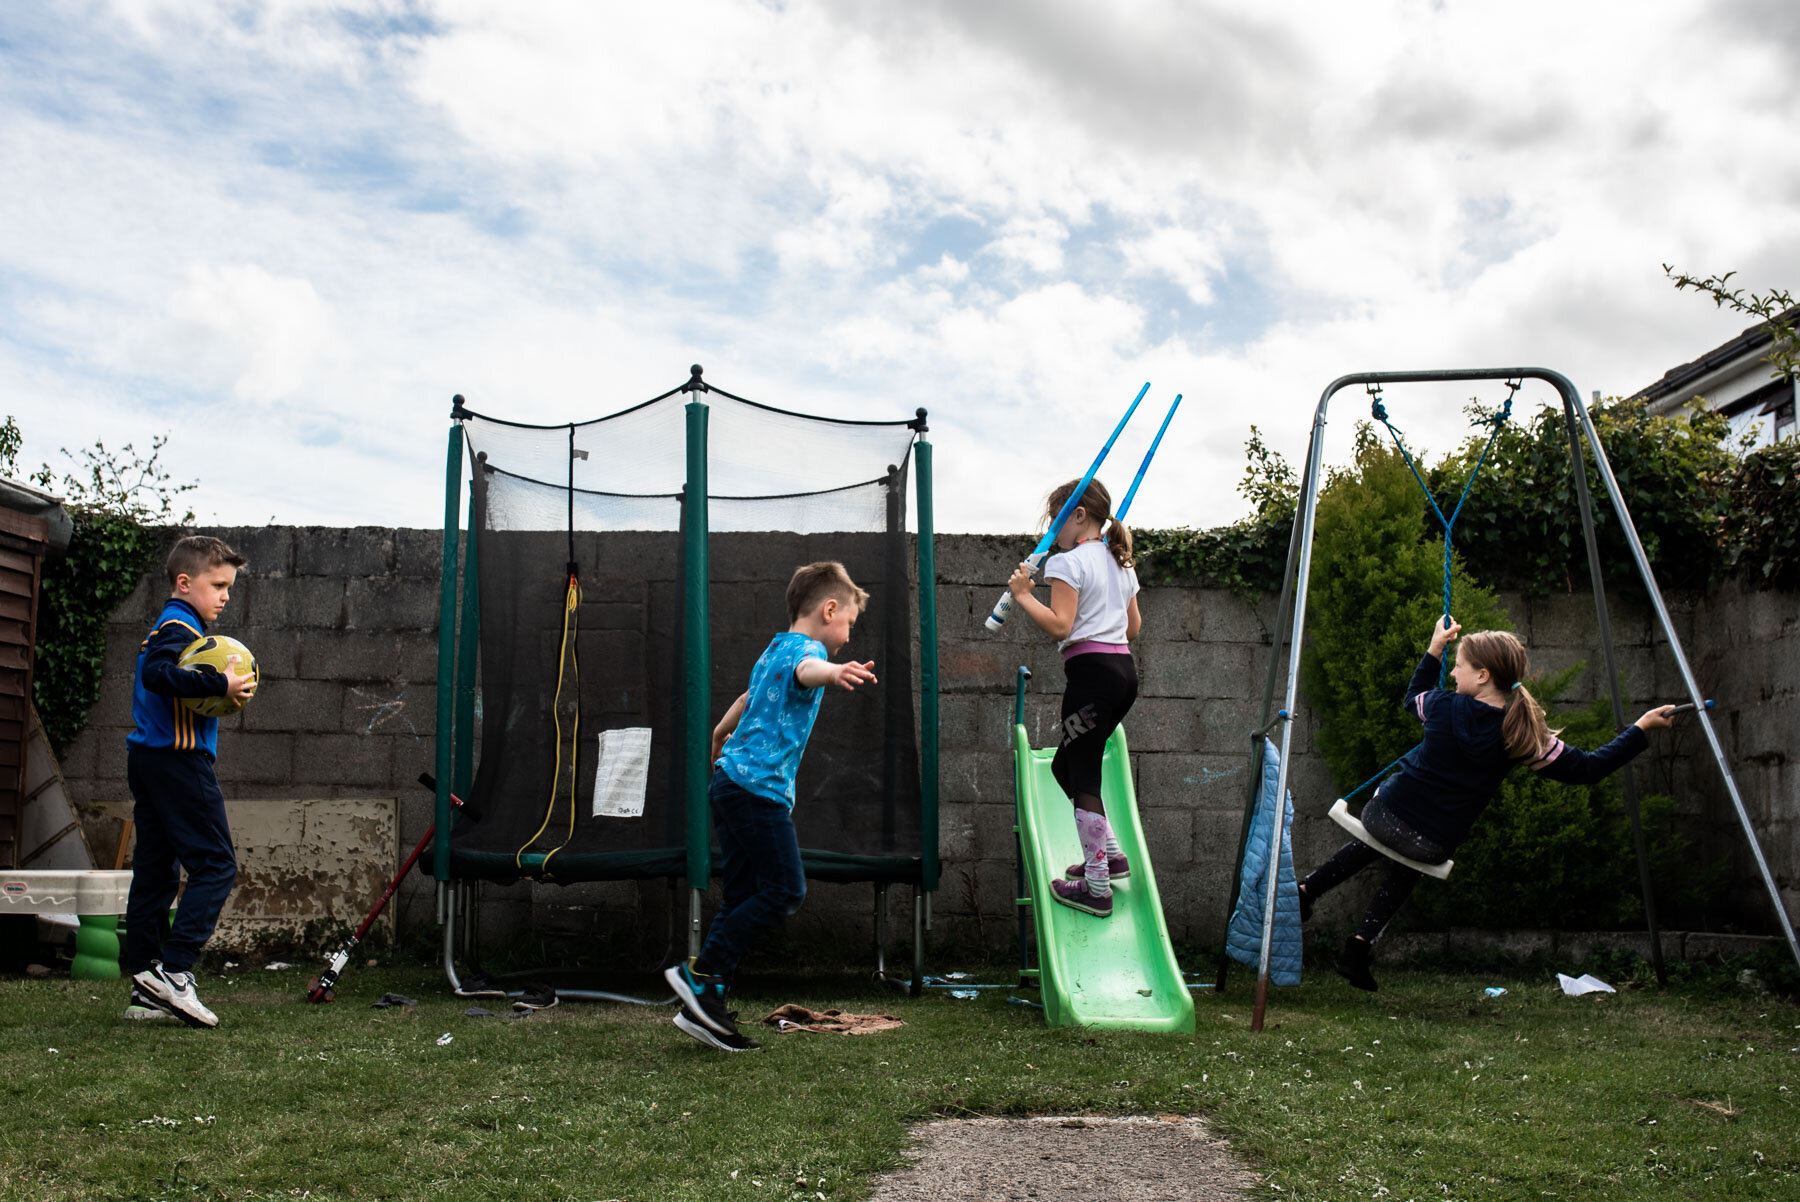 four kids playing in back garden with trampoline, swing and slide at birthday party